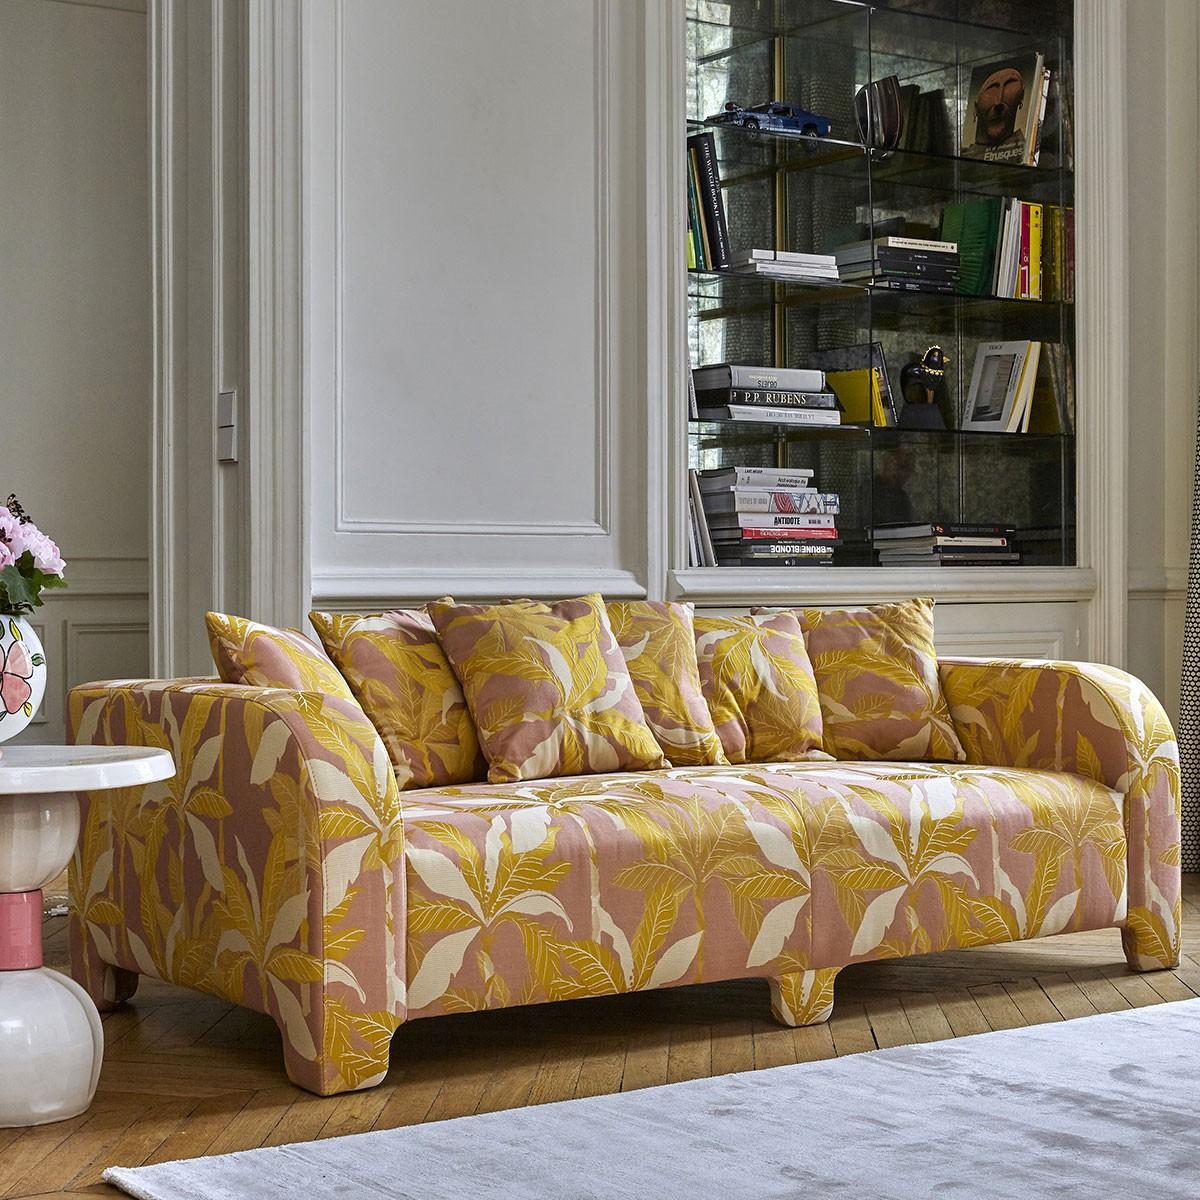 Popus Editions Graziella 4 seater sofa in citrine marrakech jacquard fabric.

A foot that hides another. A cushion that hides another. A curve that hides another with contemporary lines and a base like a punctuation mark, this sofa gives pride of